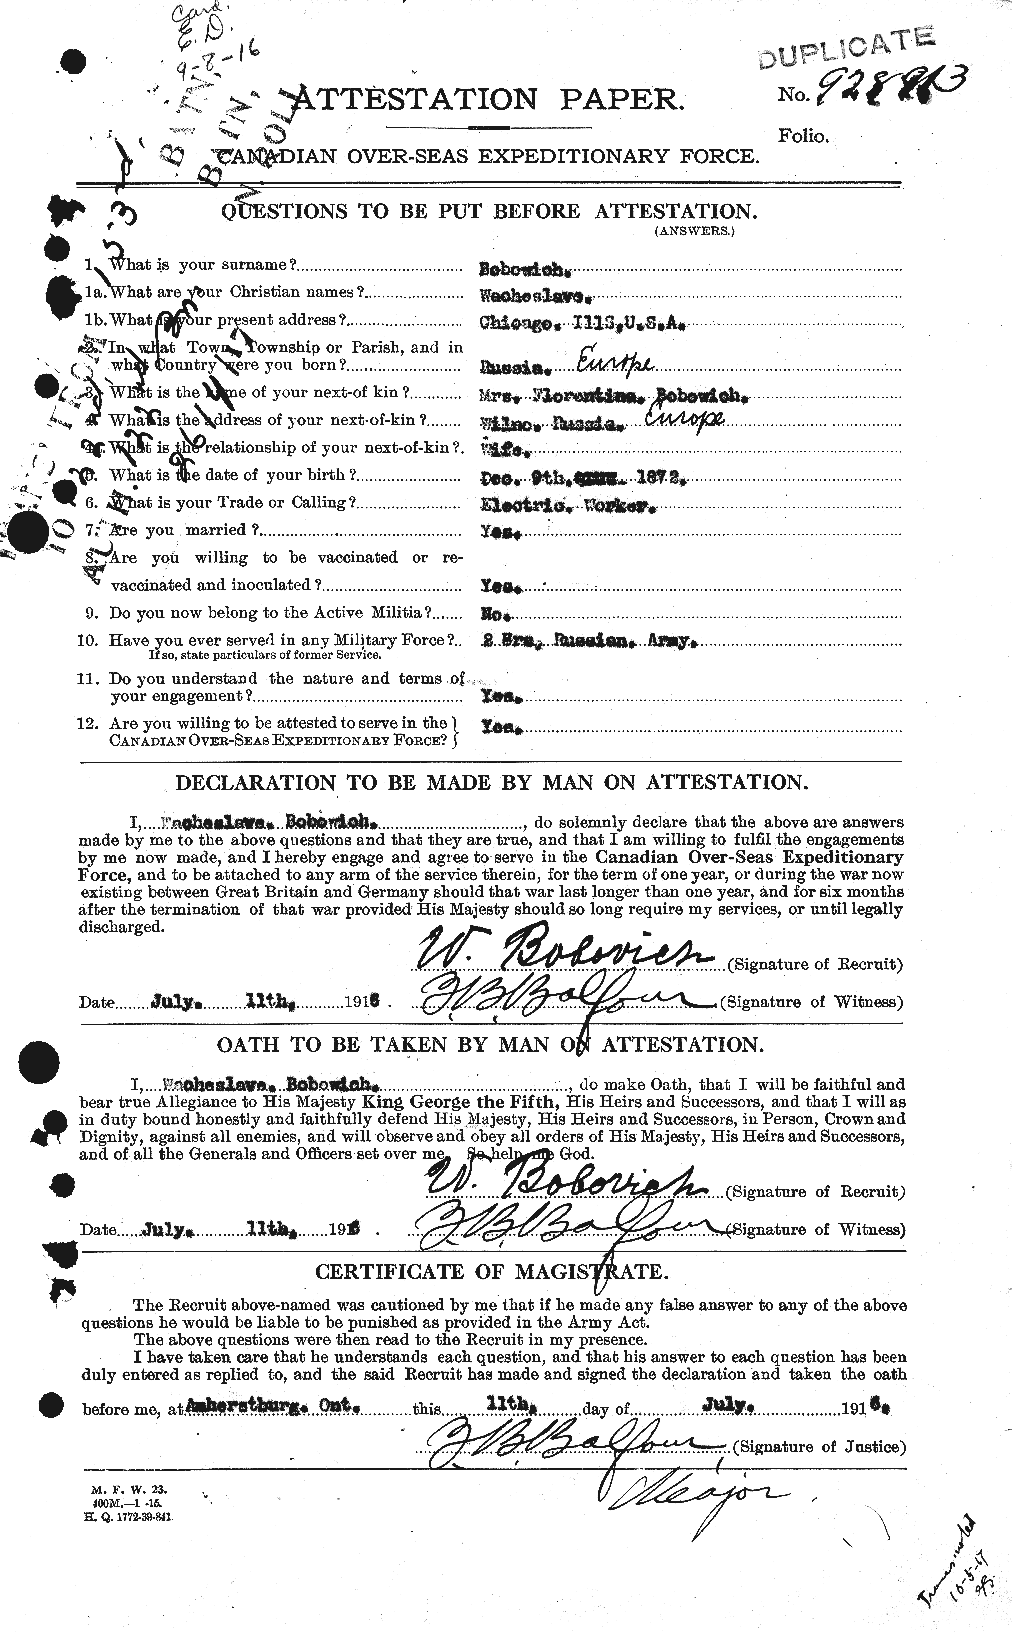 Personnel Records of the First World War - CEF 245326a